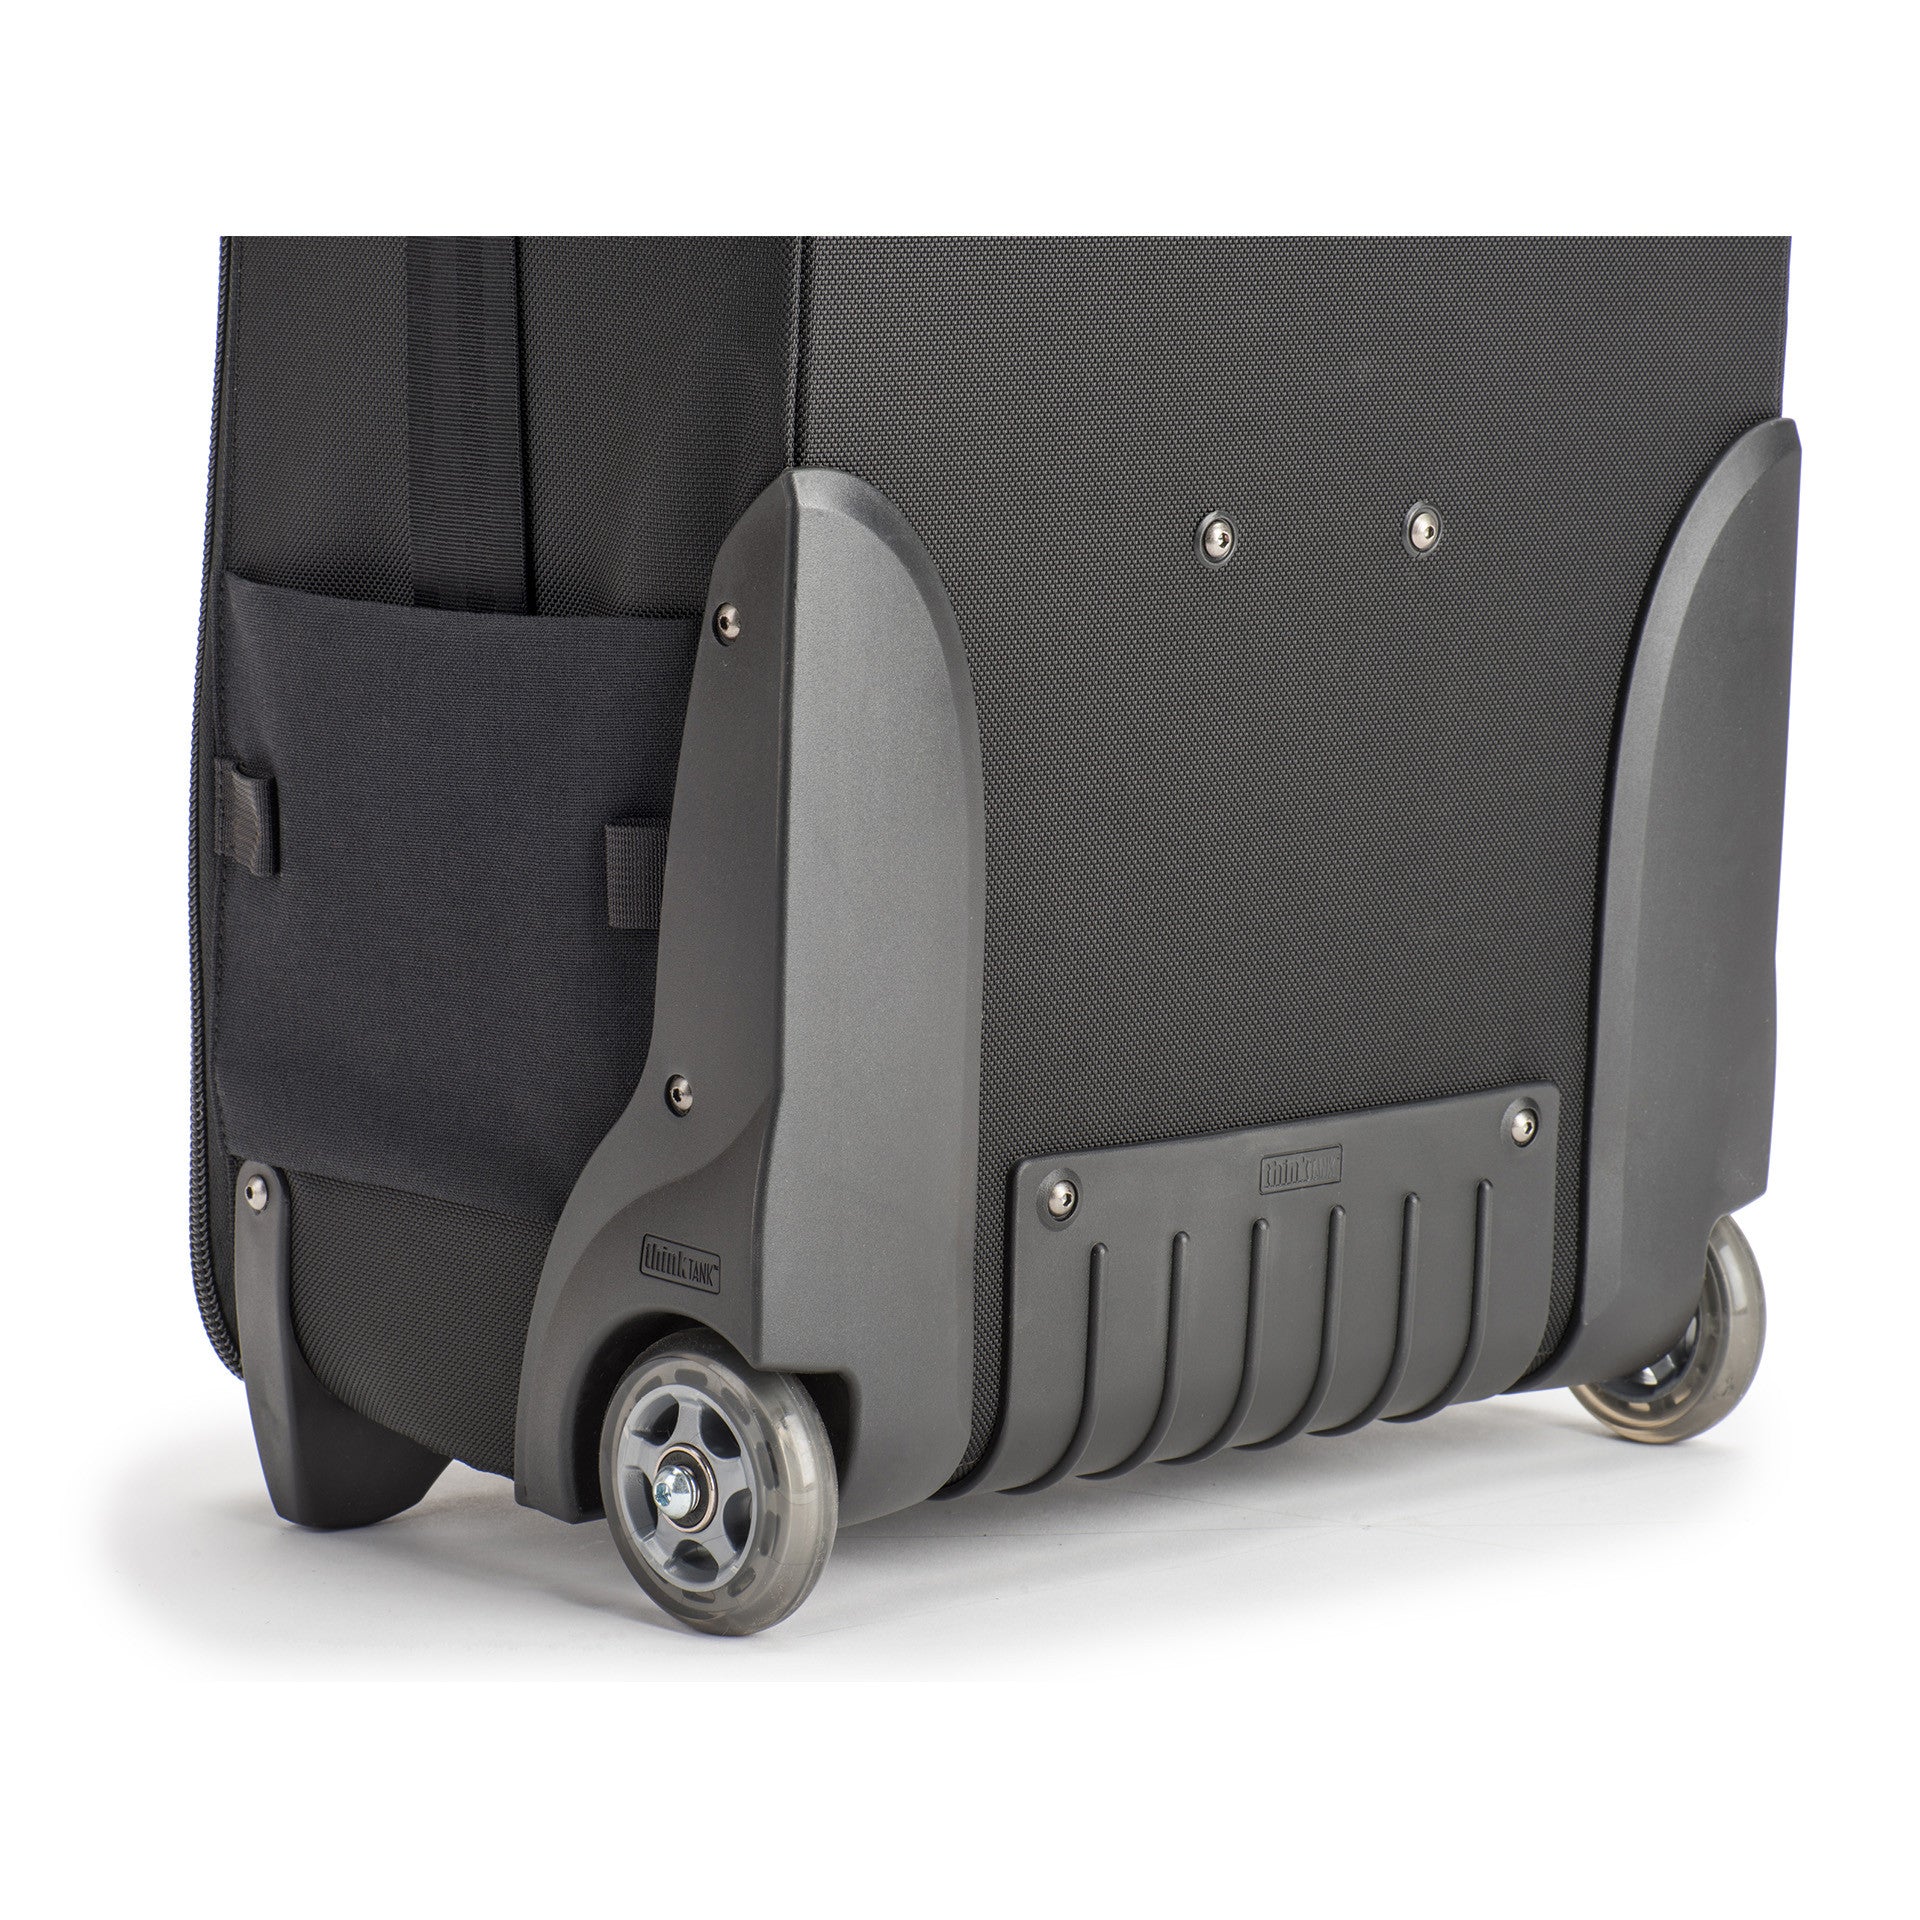 Extra tall wheel housings protect your bag from scrapes and scratches